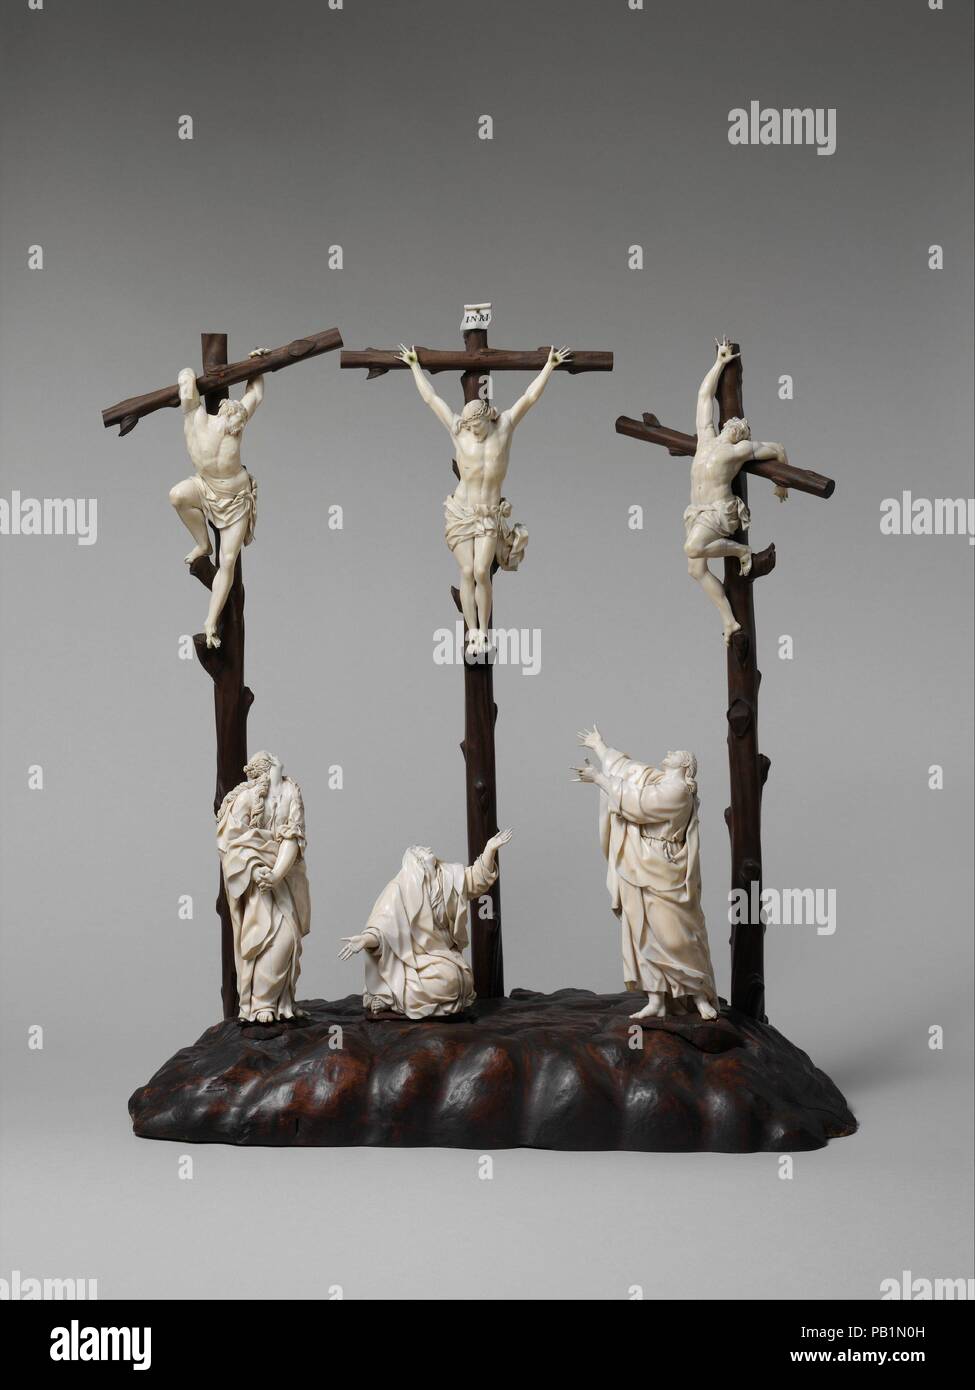 Crucifixion. Culture: possibly German or Netherlandish. Dimensions: Height (.182a, with cross): 21 1/8 in. (53.7 cm);  Height (.182a, figure only): 8 1/2 in. (21.6 cm);  Height (.182b, with cross): 20 1/8 in. (51.1 cm);  Height (.182b, figure only): 8 in. (20.3 cm);  Height (.182c, with cross): 20 1/8 in. (51.1 cm);  Height (.182c, figure only): 8 1/8 in. (20.6 cm);  Height (.182d): 4 1/4 in. (10.8 cm);  Height (.182e): 6 7/8 in. (17.5 cm);  Height (.182f): 7 1/2 in. (19.1 cm). Date: late 17th-early 18th century.  Calvary was the hill outside Jerusalem where Christ was crucified. Here, the tra Stock Photo